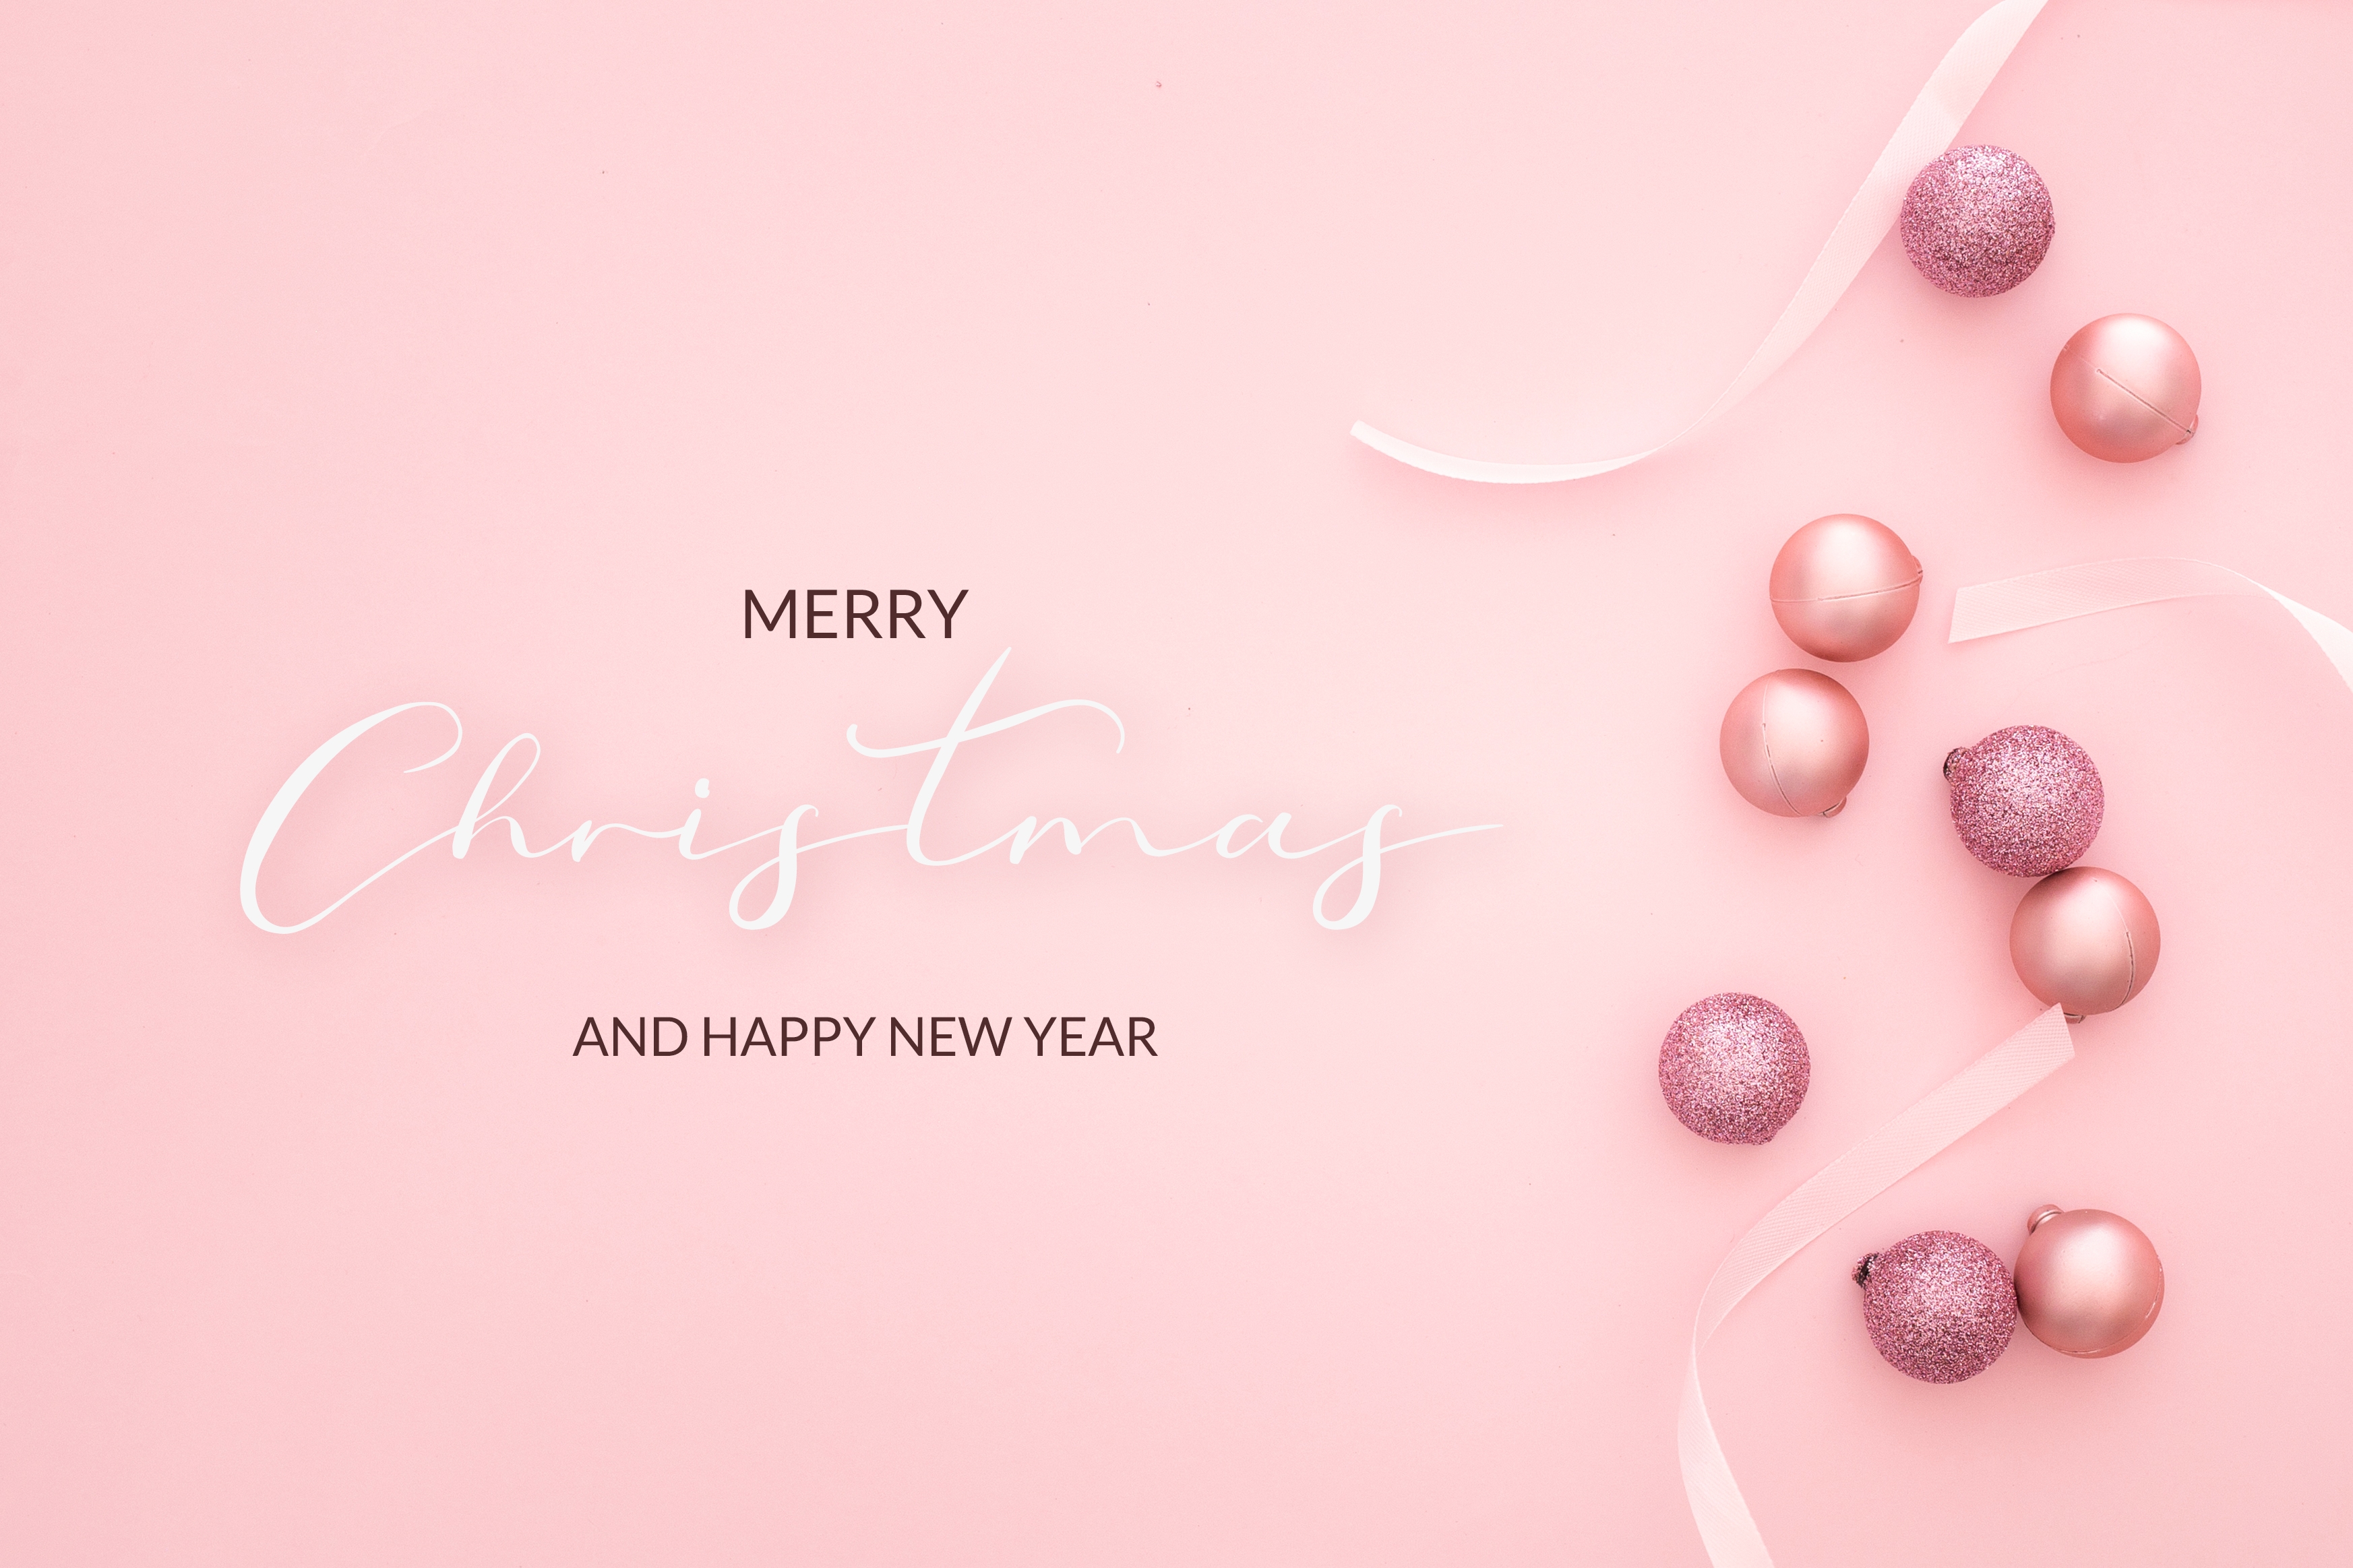 HD wallpaper, Christmas Decoration, Merry Christmas, Pink Background, Decoration, Navidad, Happy New Year, Noel, Peach Background, Pastel Background